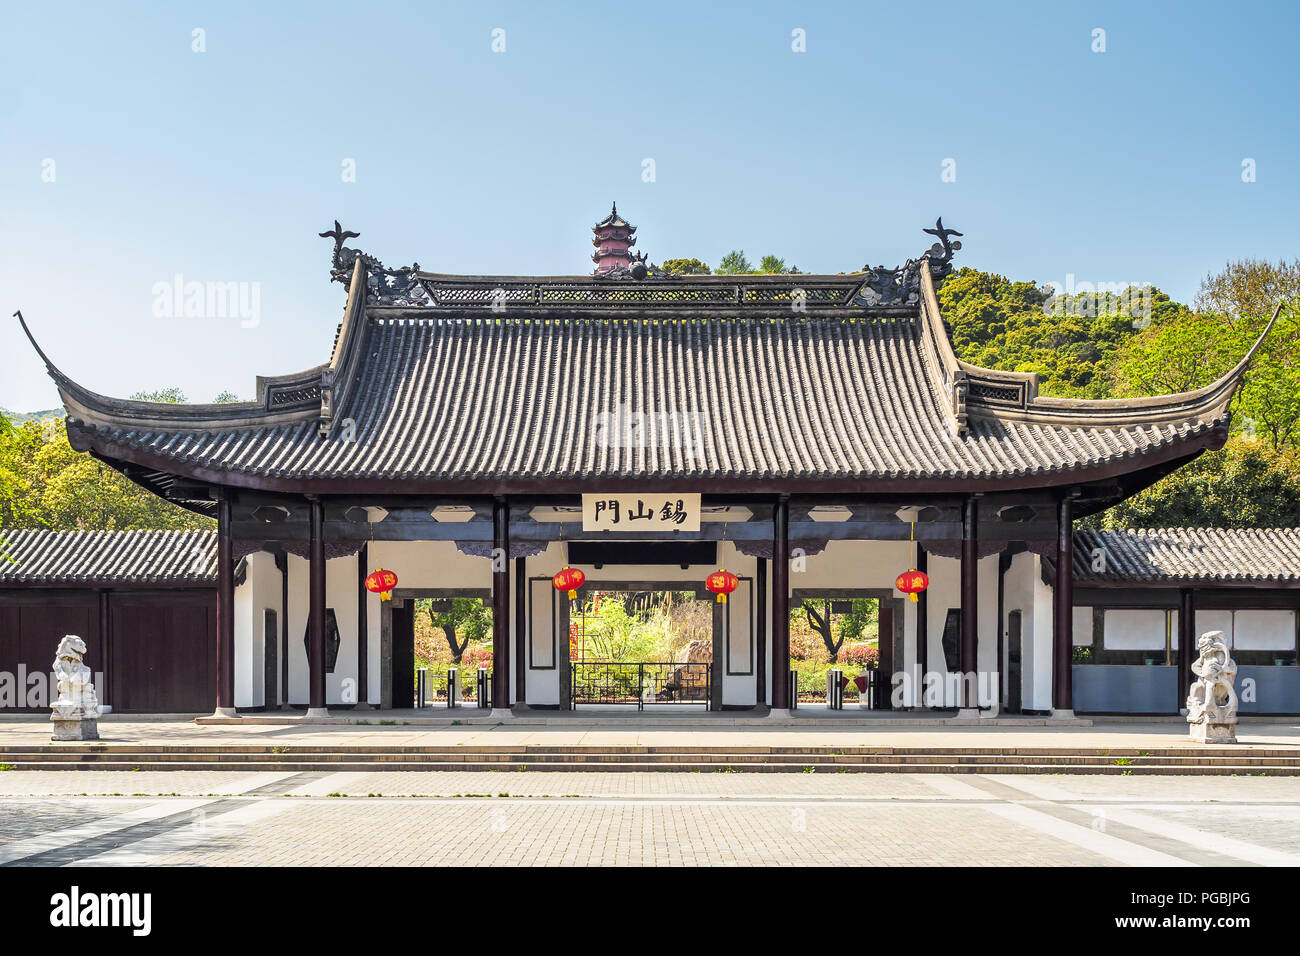 The main entrance of Xihui Park with the Longguang Pagoda in Wuxi, China. (The translation of the text on the gate means 'tin mountain door.') Stock Photo